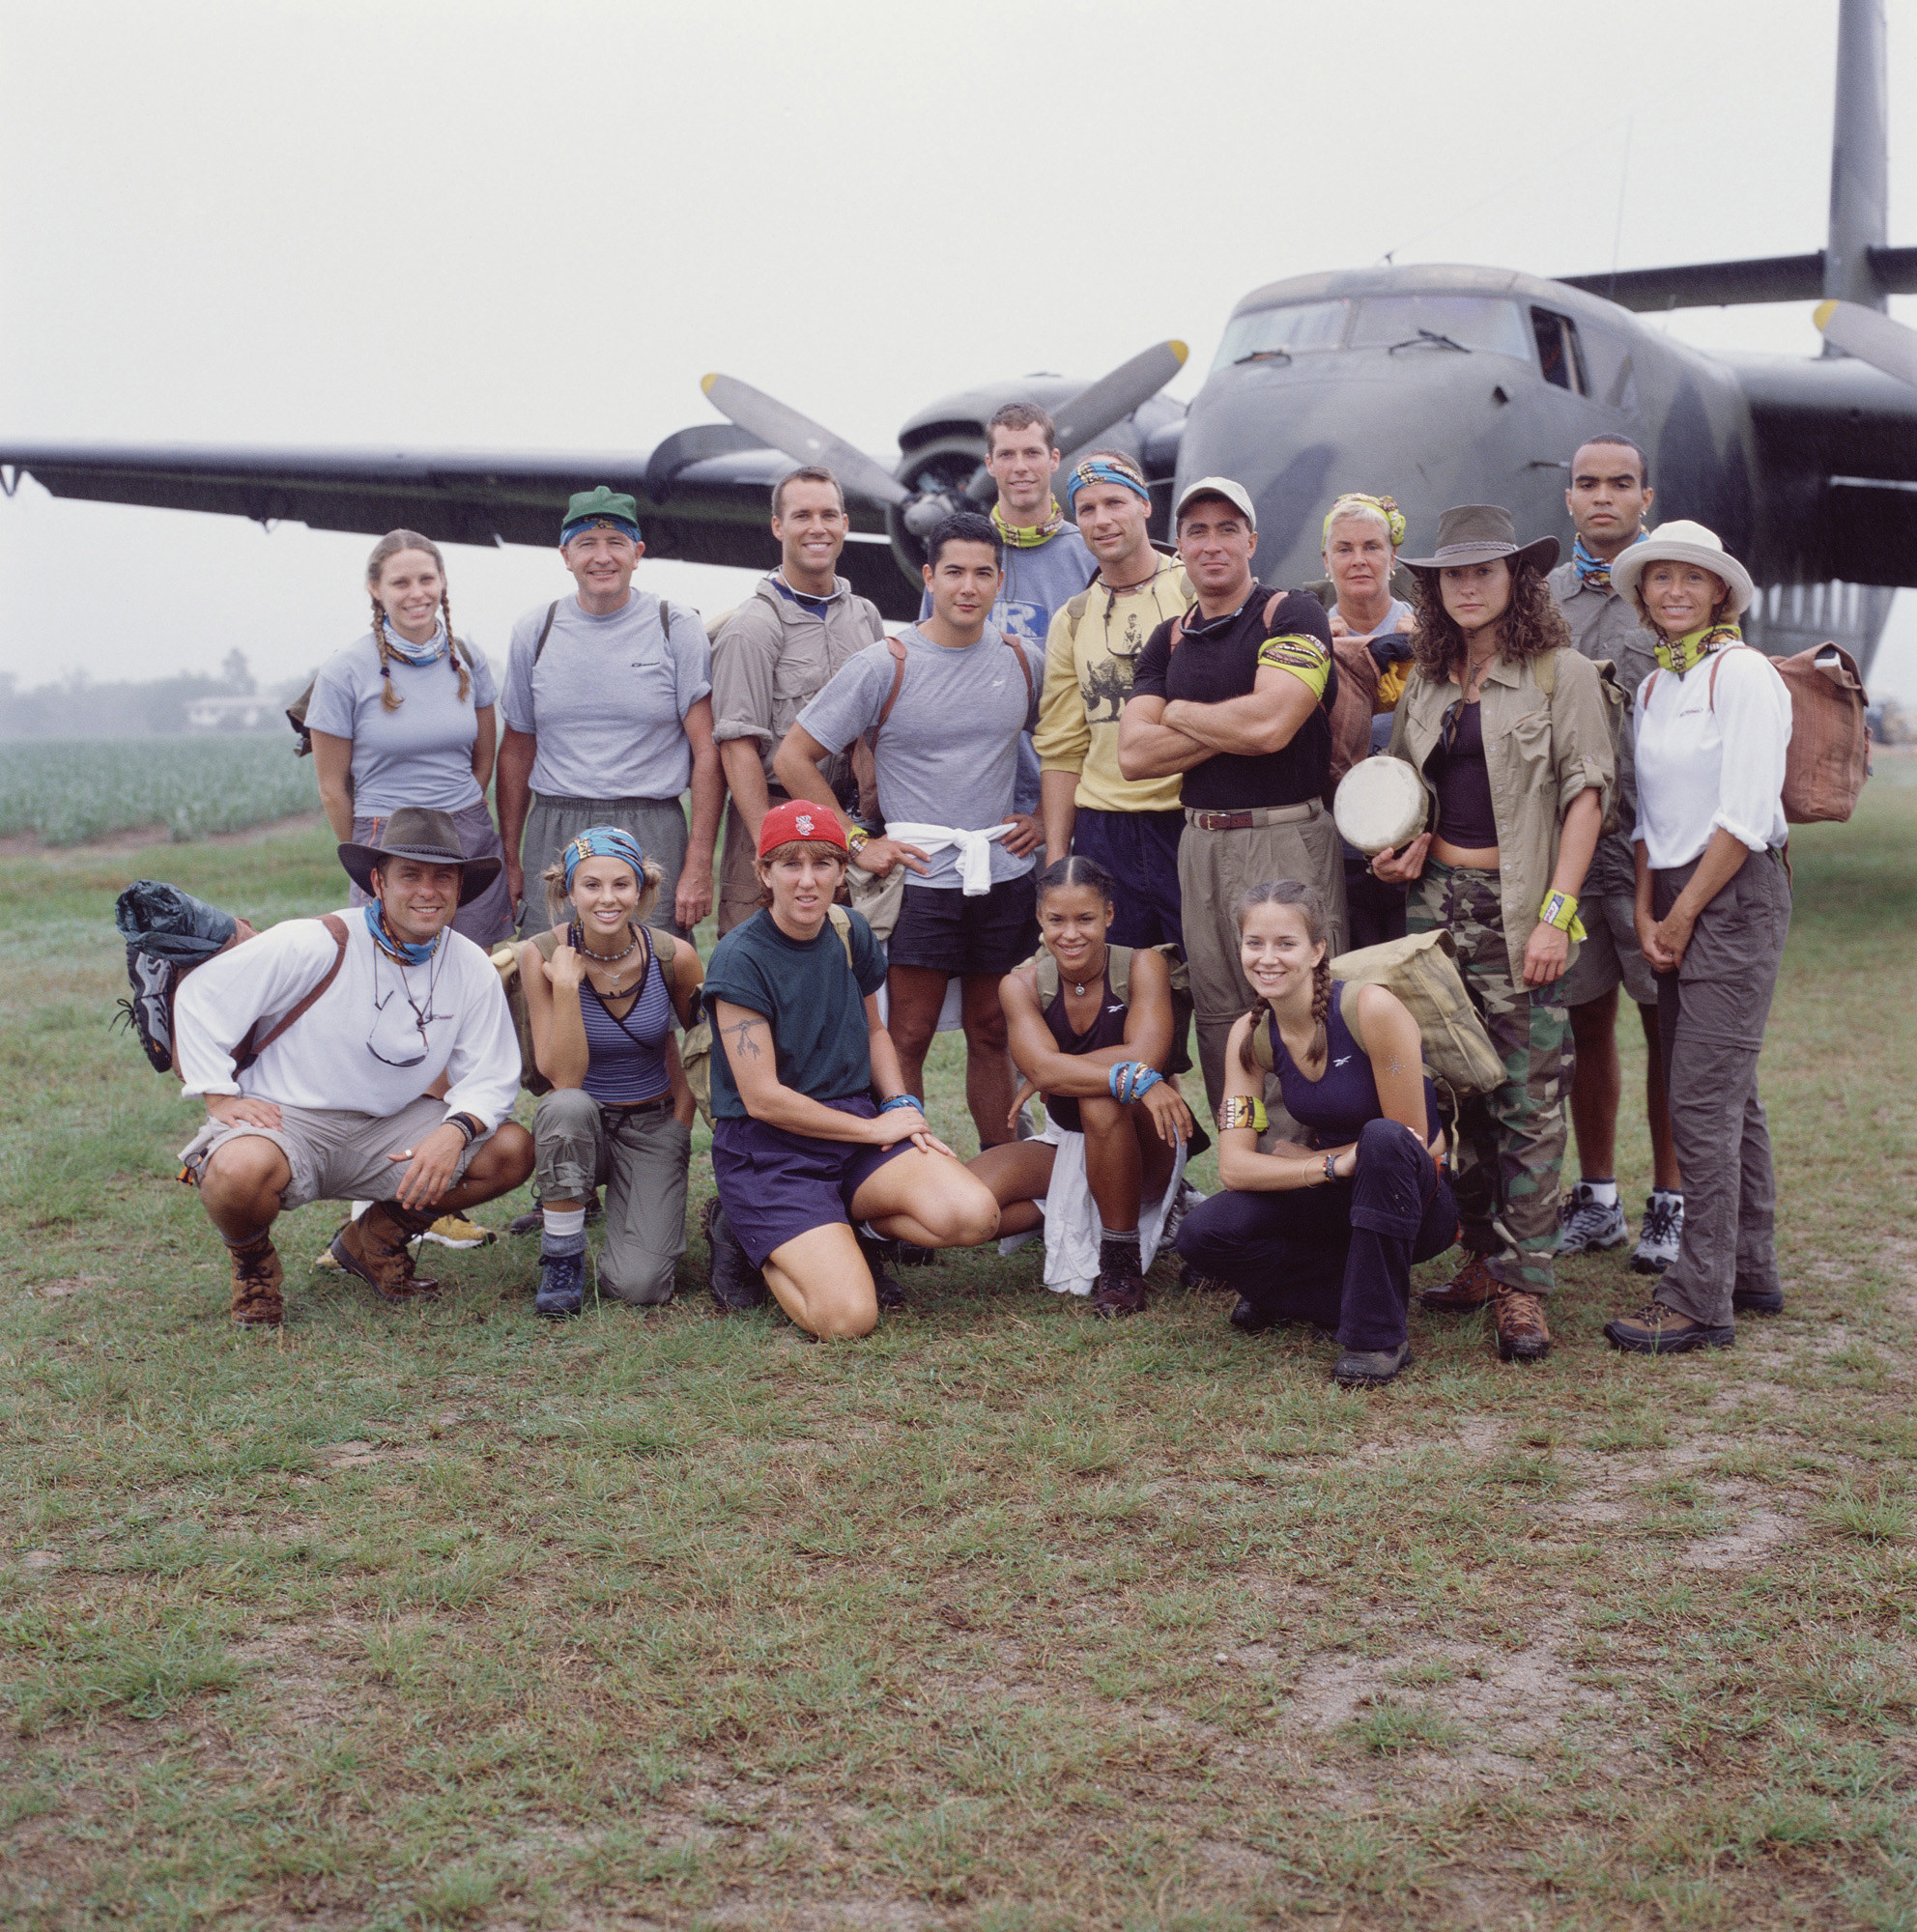 The Castaways stand in front of an airplane